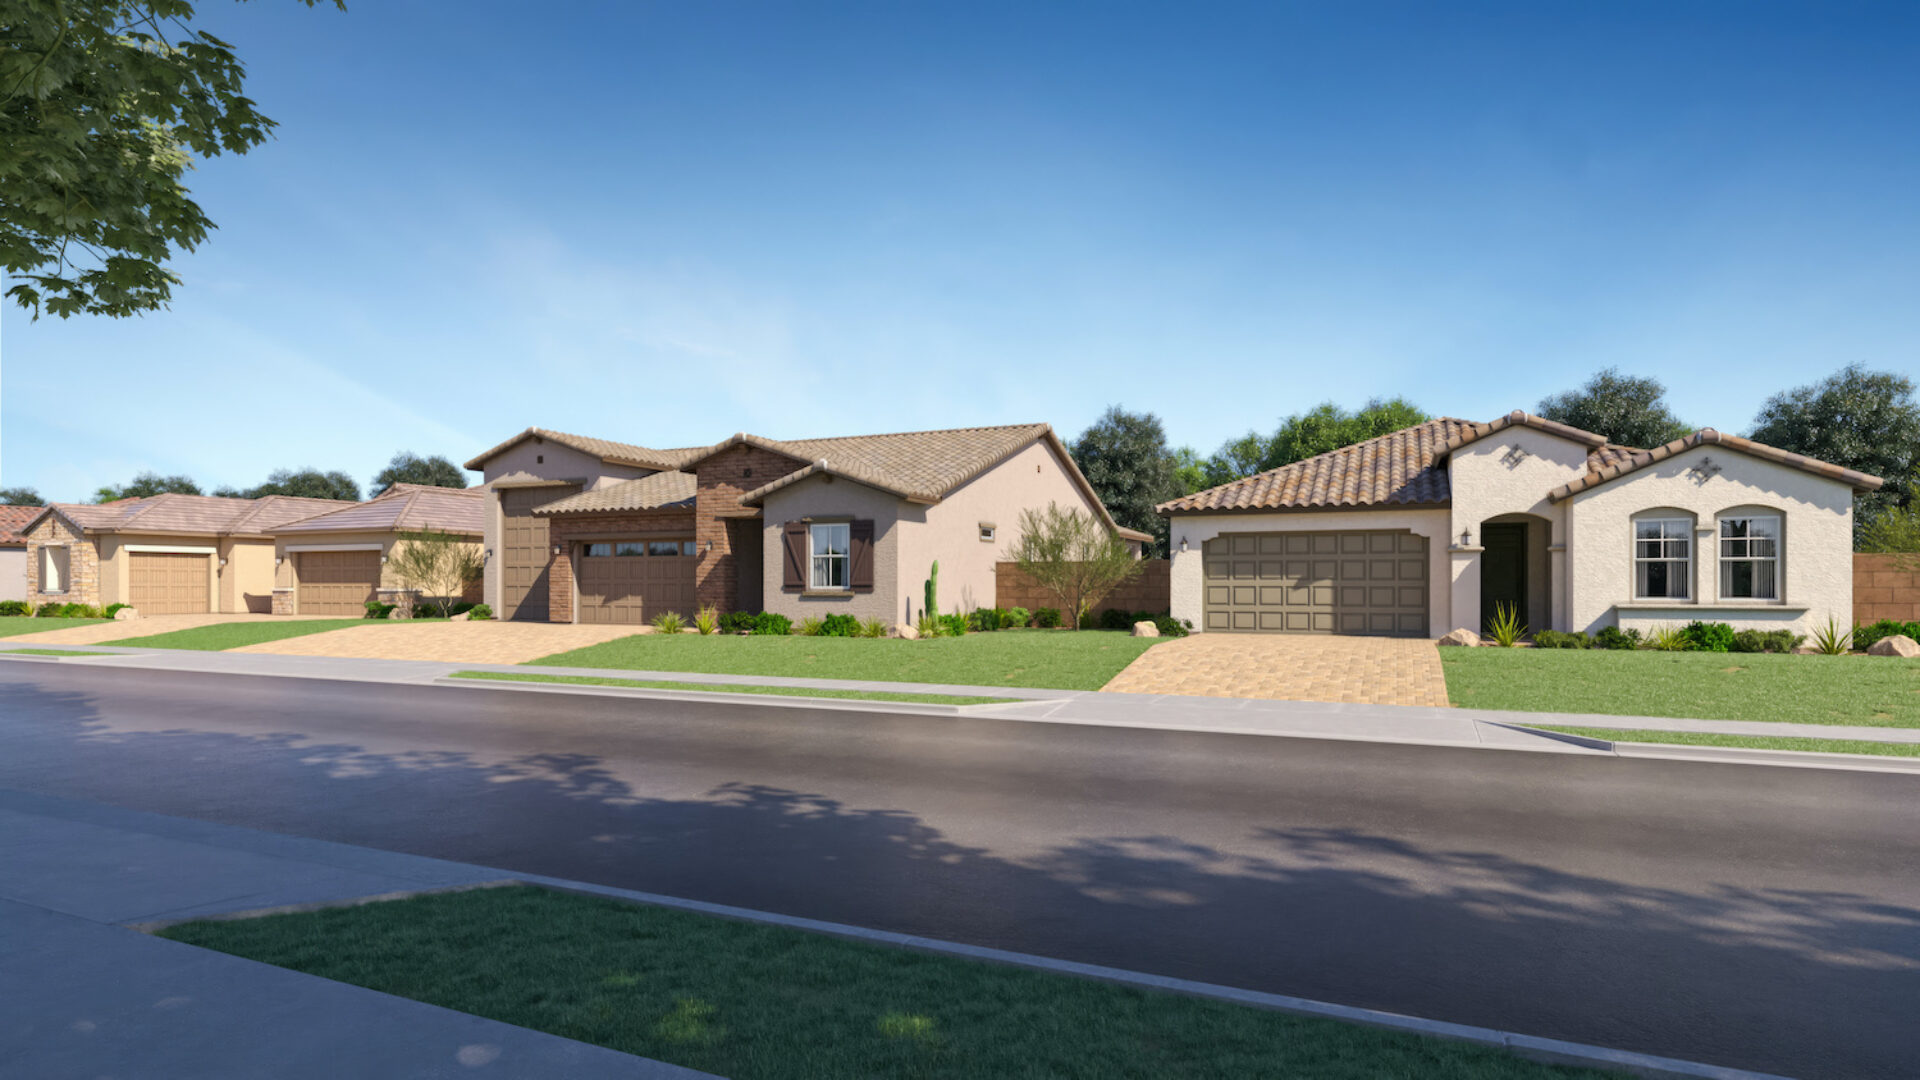 New homes for sale in Peoria at Aloravita